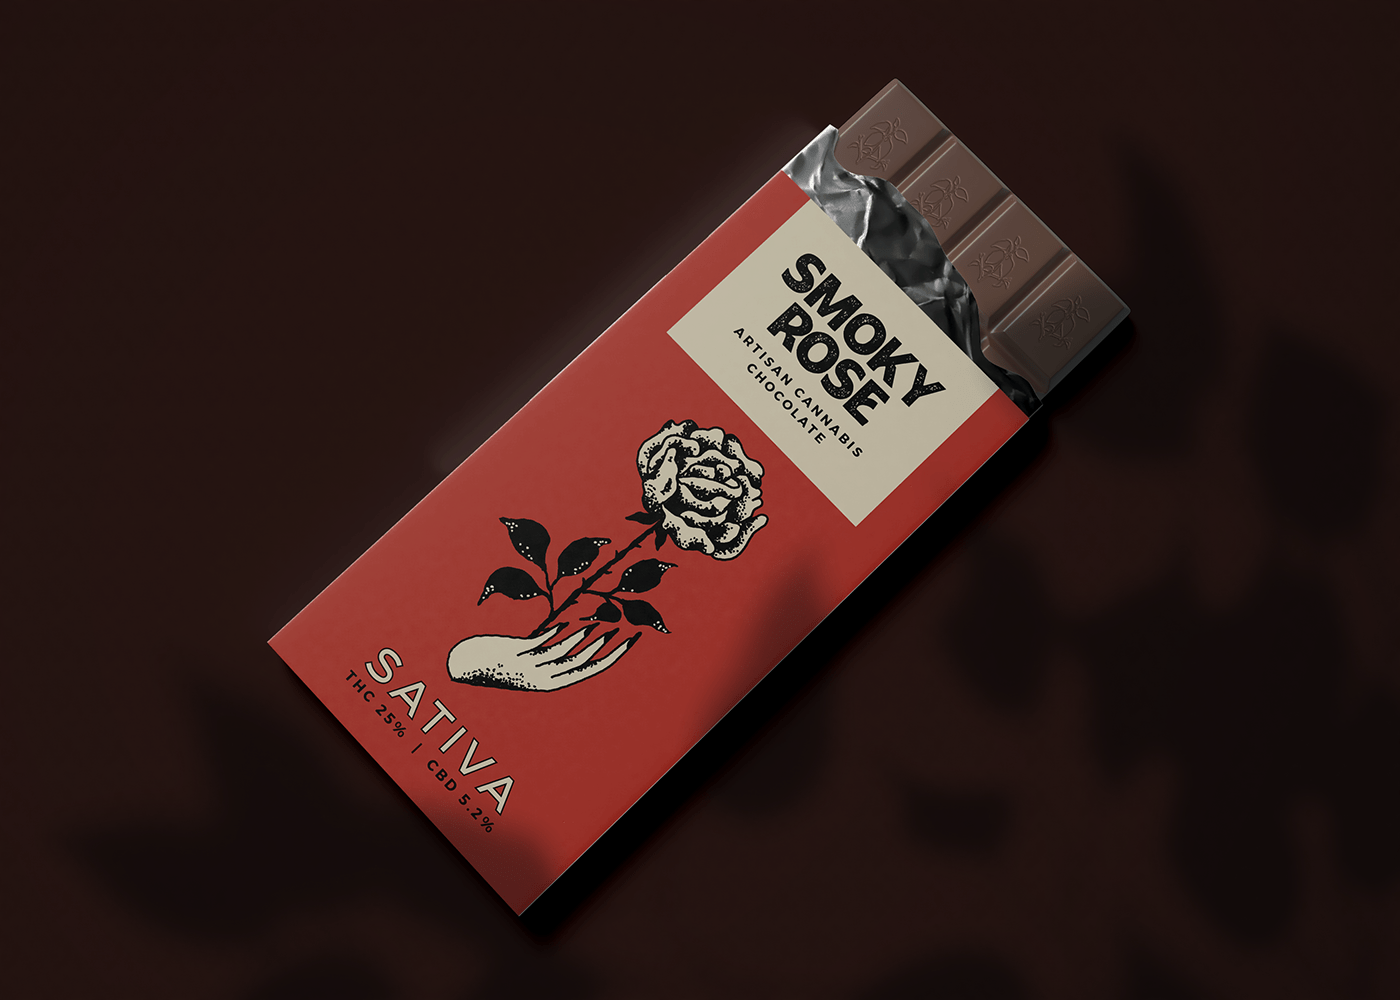 branding  cannabis cannabutter chocolate identity ILLUSTRATION  Packaging tattoo weed